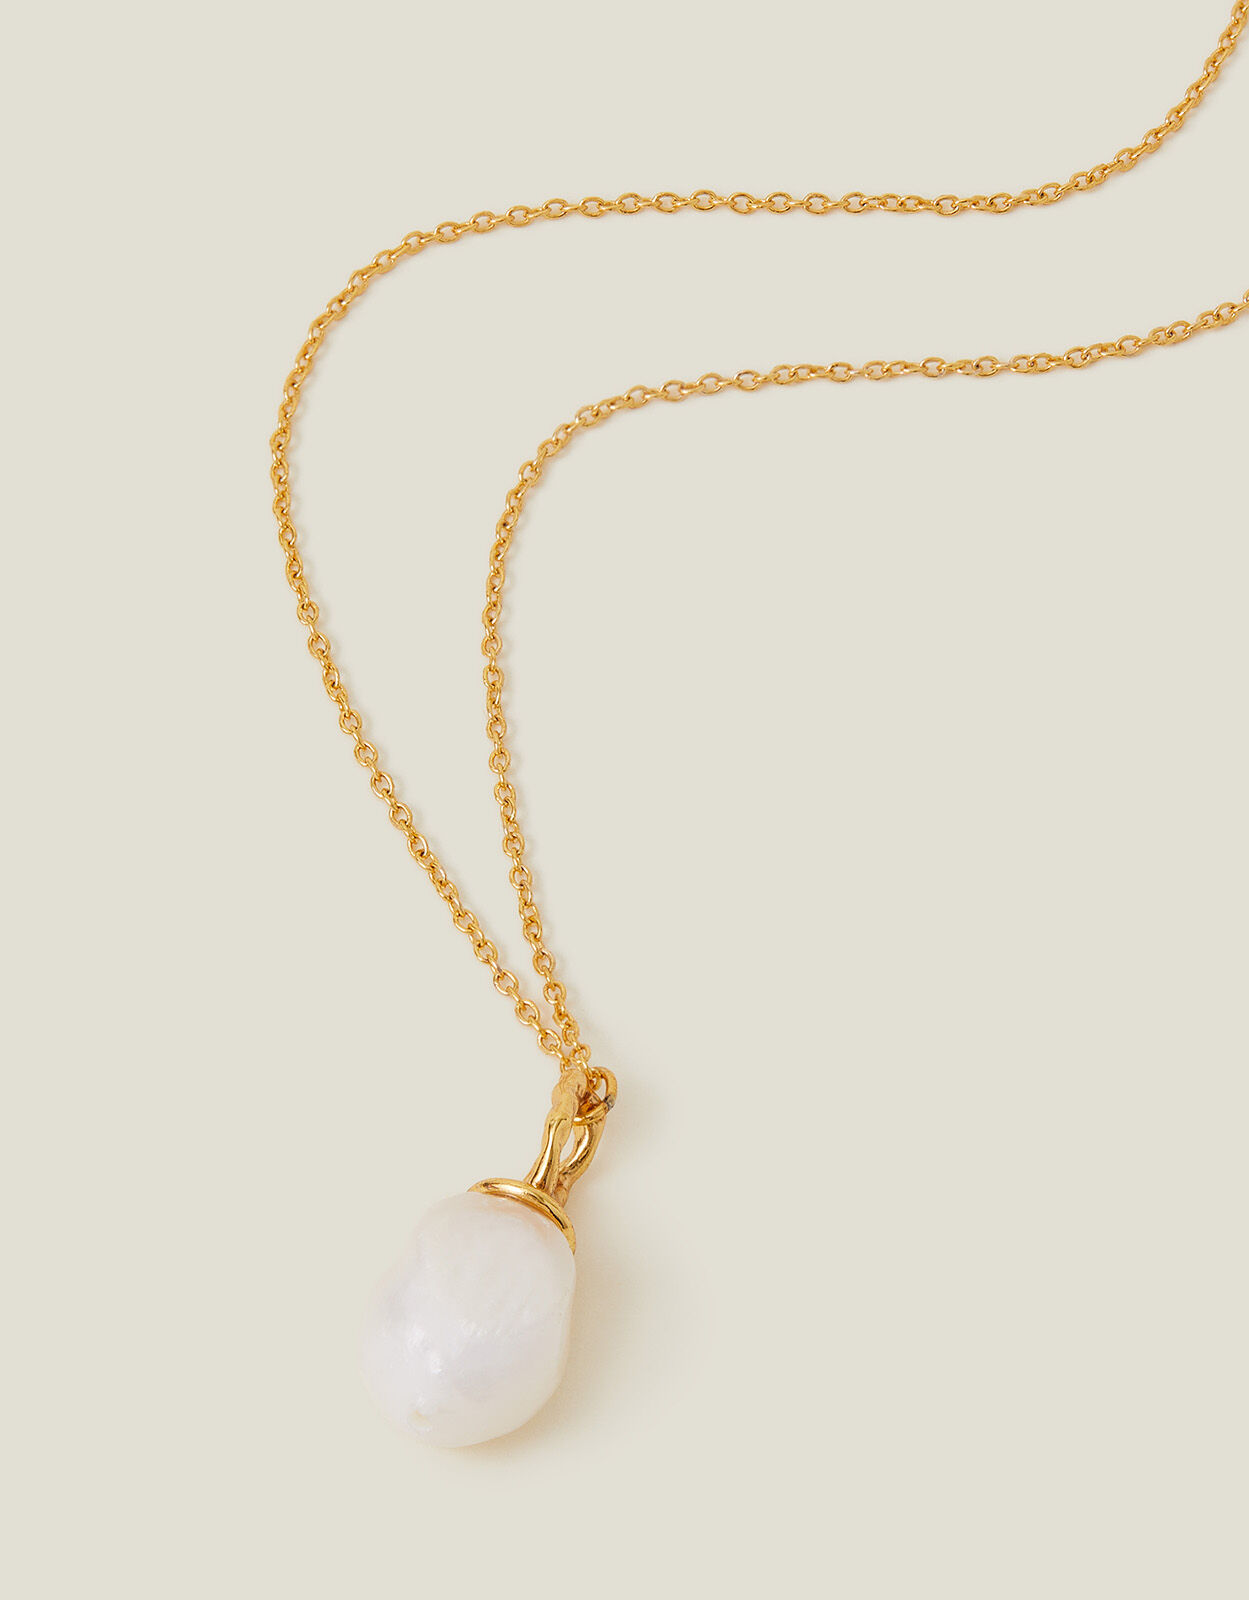 14ct Gold-Plated Long Pearl Pendant Necklace